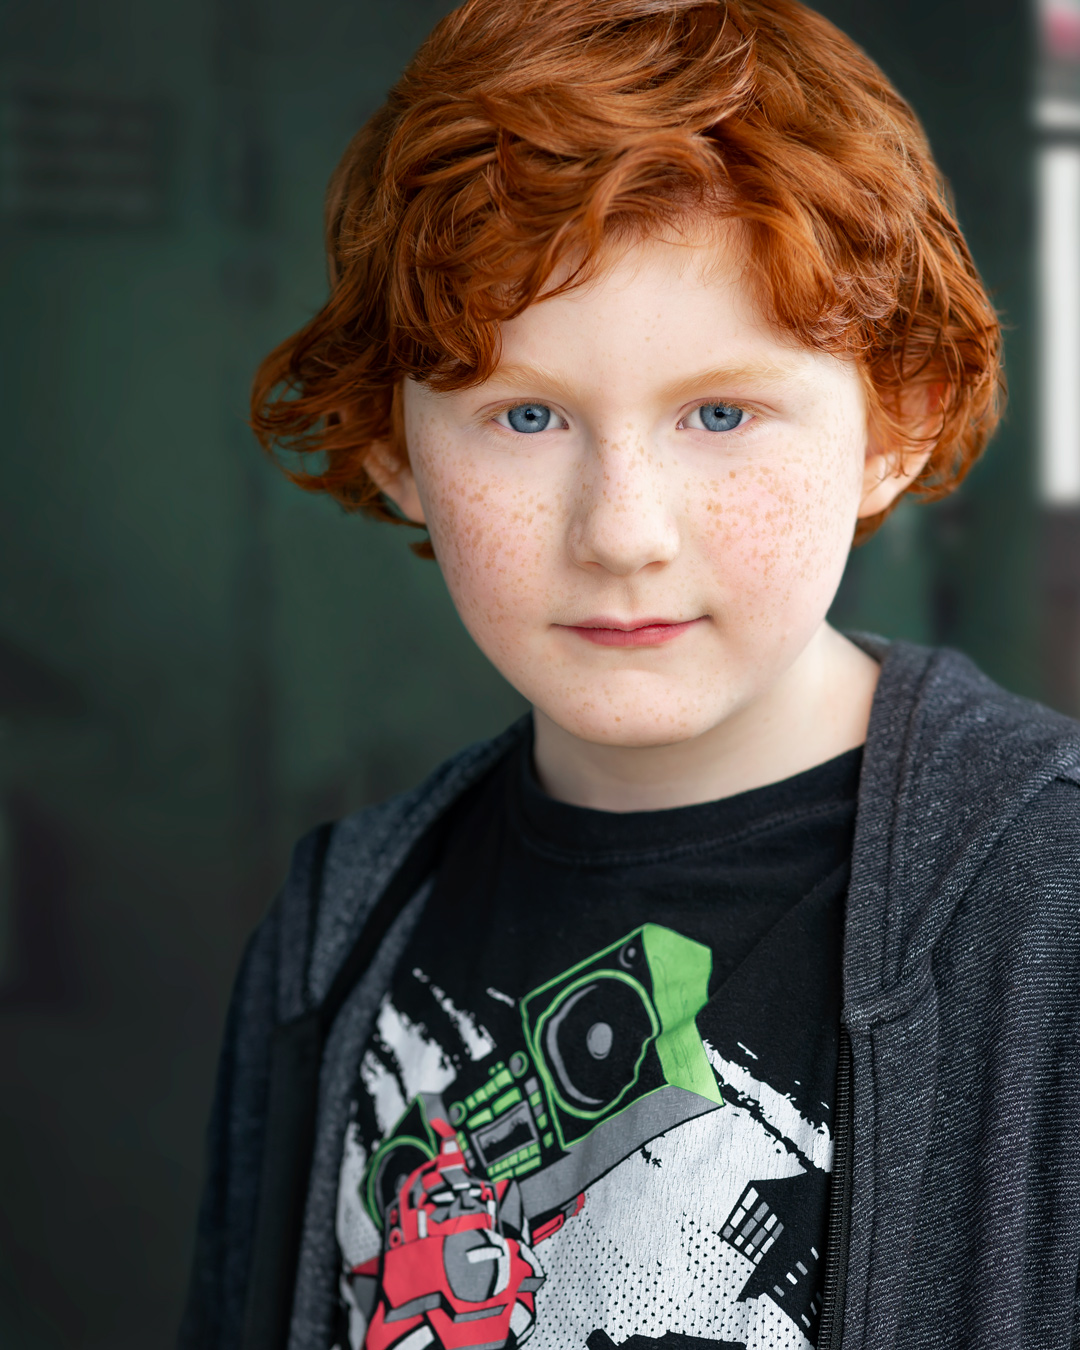 Dramatic tv and film headshot for redhead child actor Conor O'Mahony